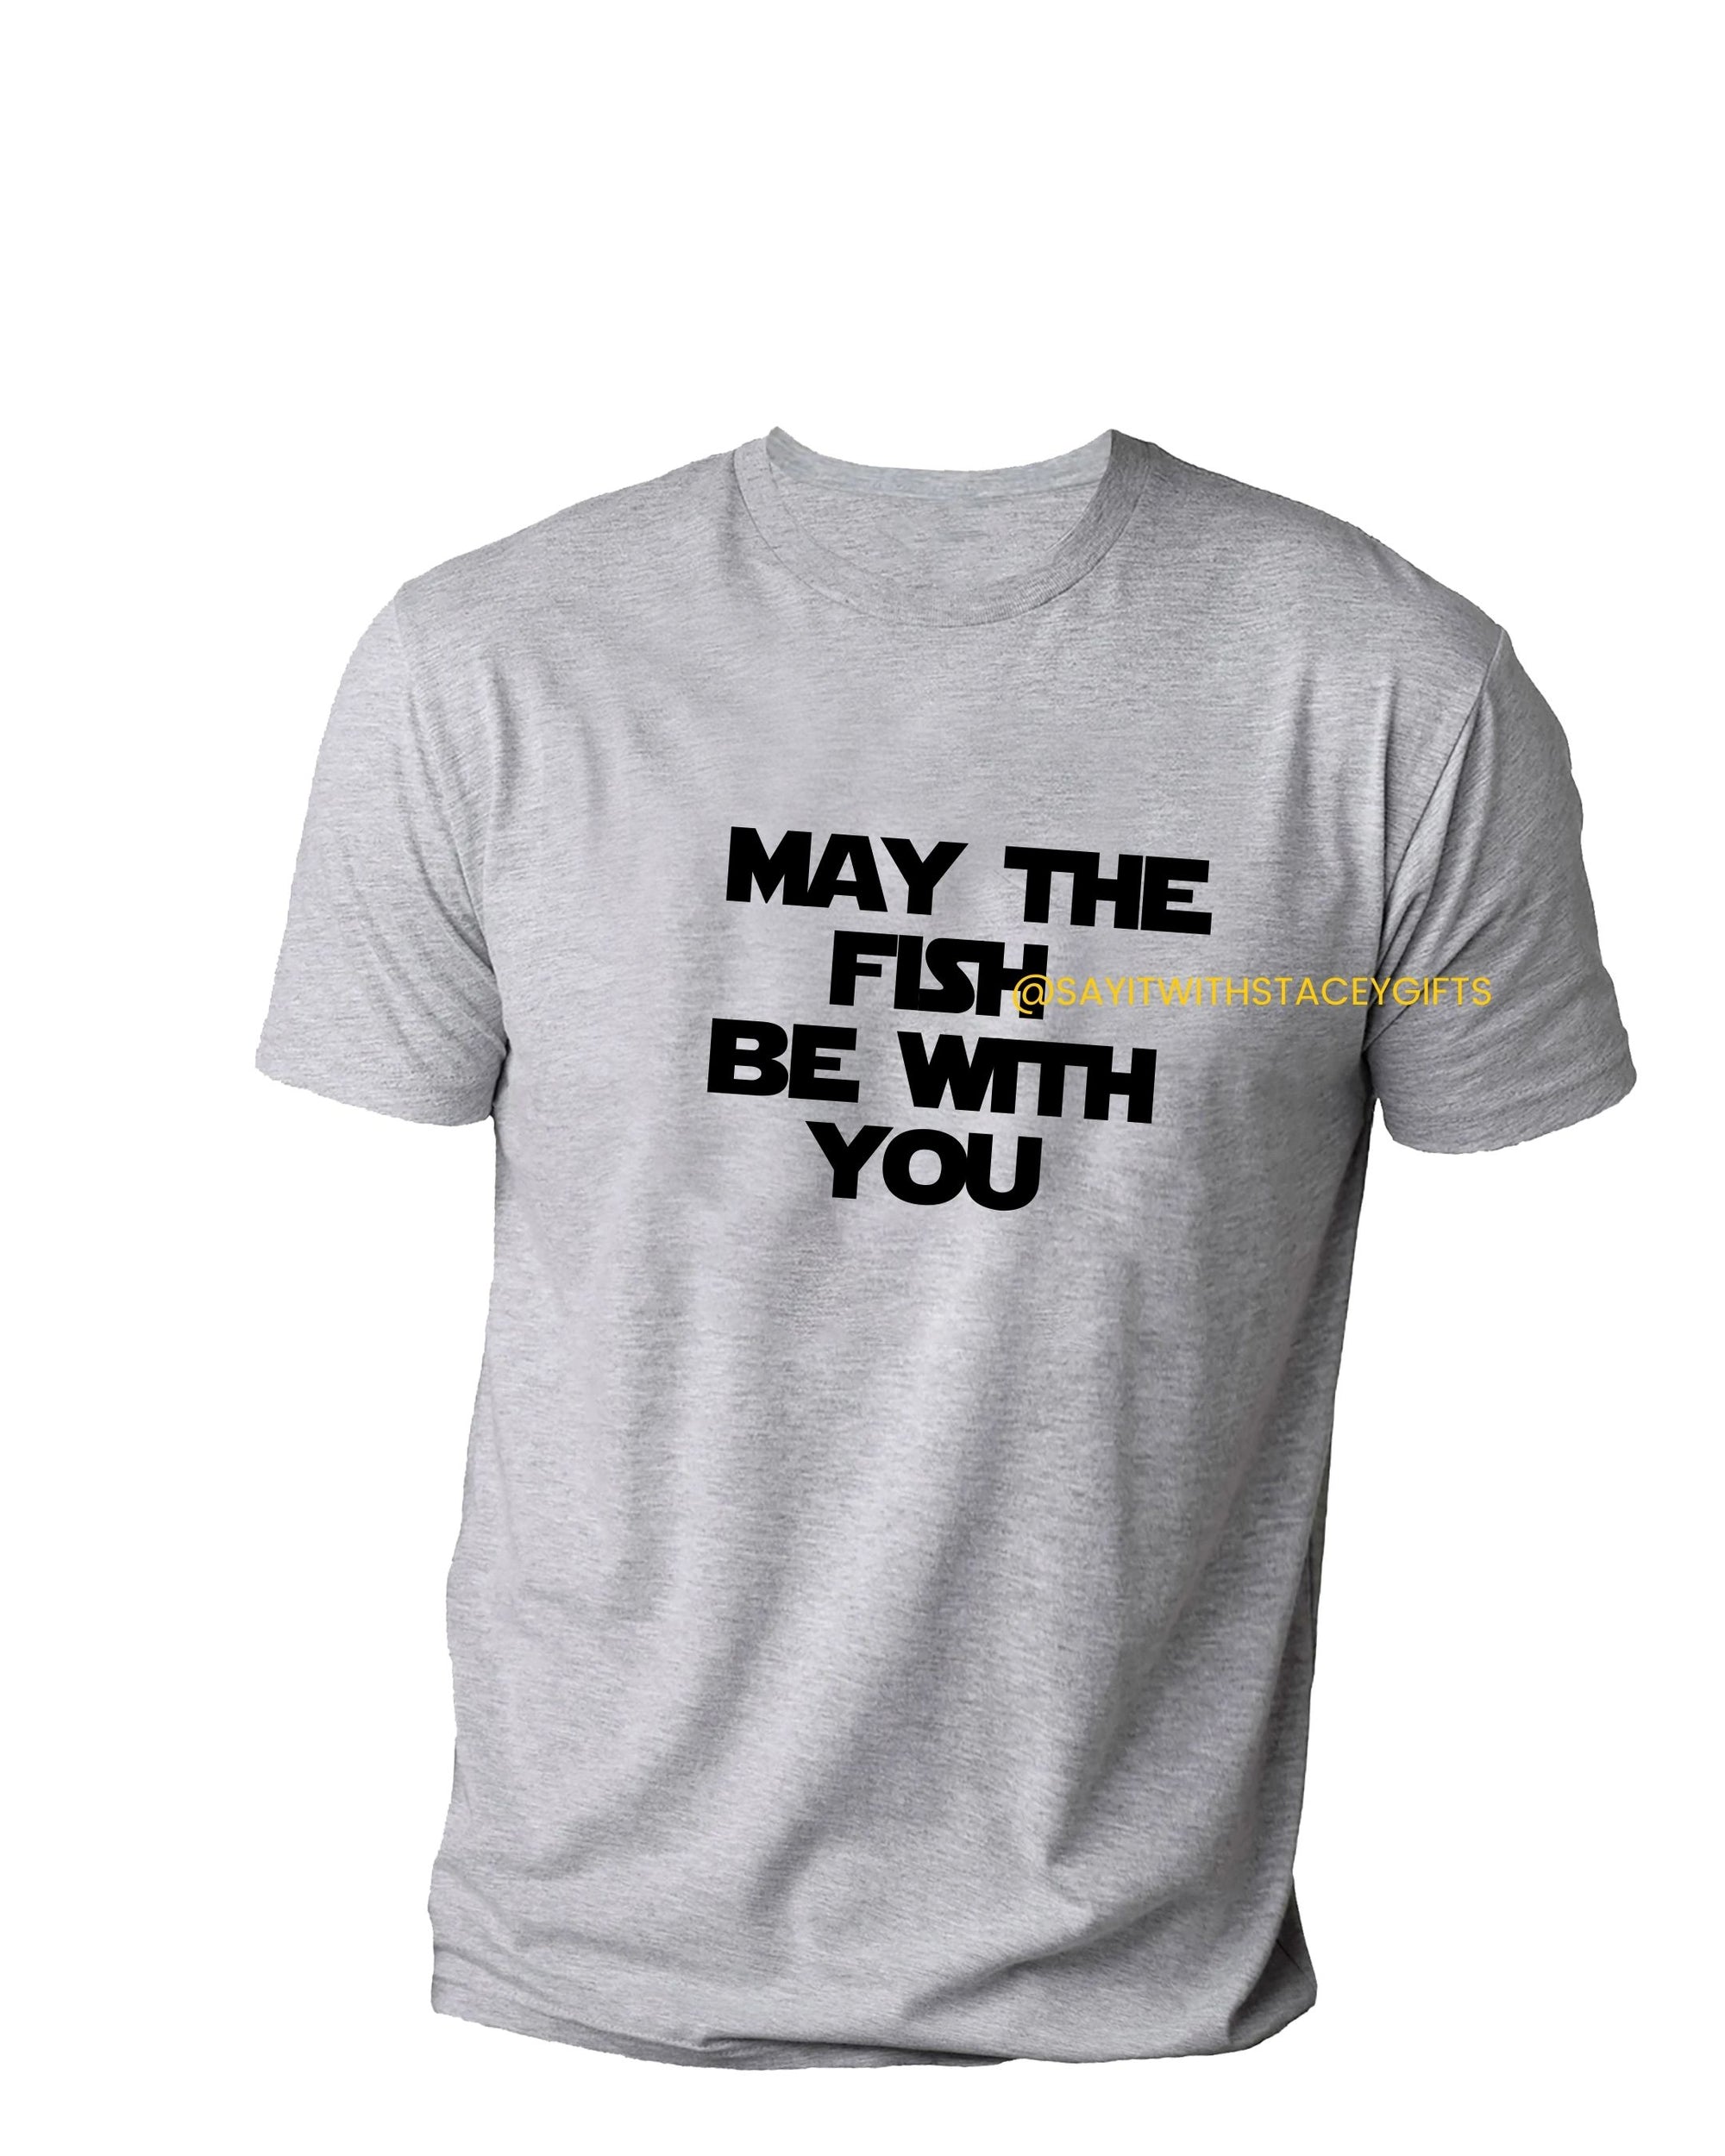 may the fish be with you tshirt 